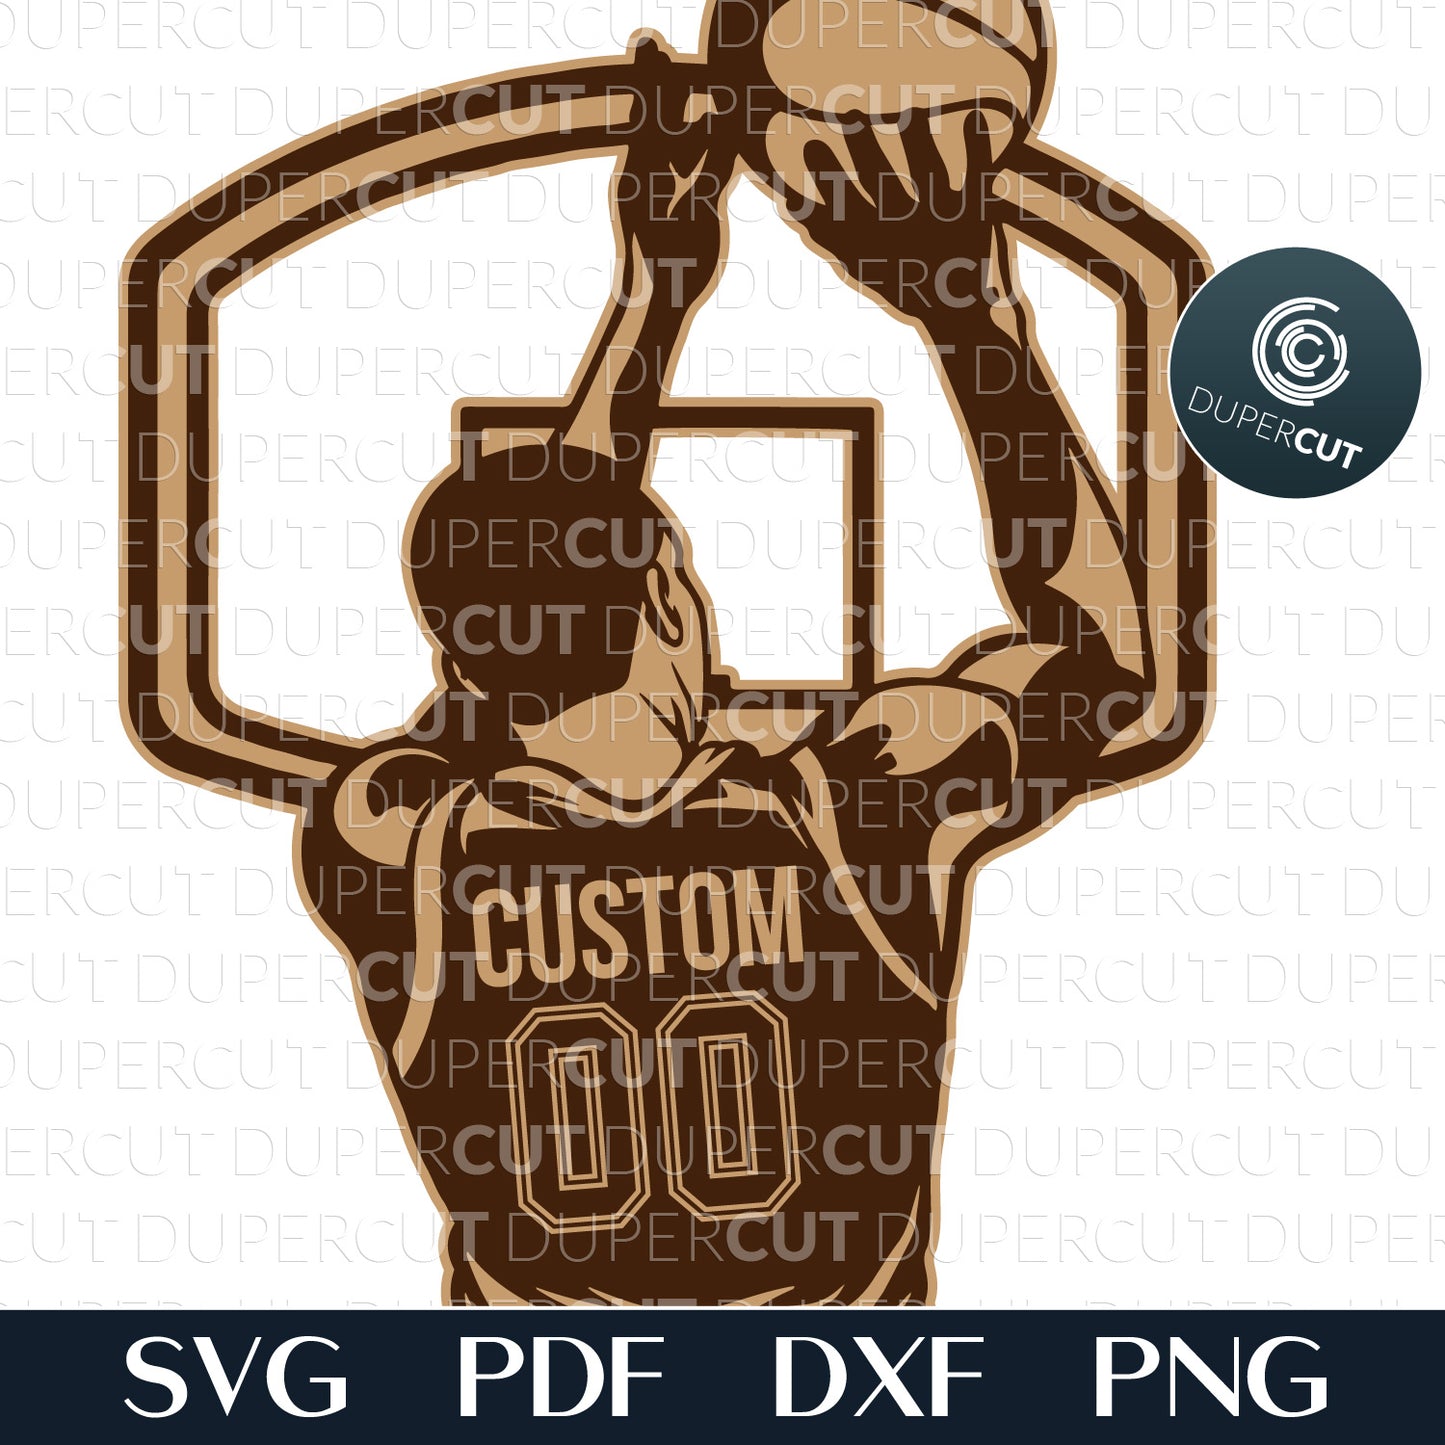 Basketball sign with custom name and number - SVG EPS DXF vector layered files for Glowforge, Cricut, Silhouette Cameo, CNC plasma machines, scroll saw pattern by www.DuperCut.com